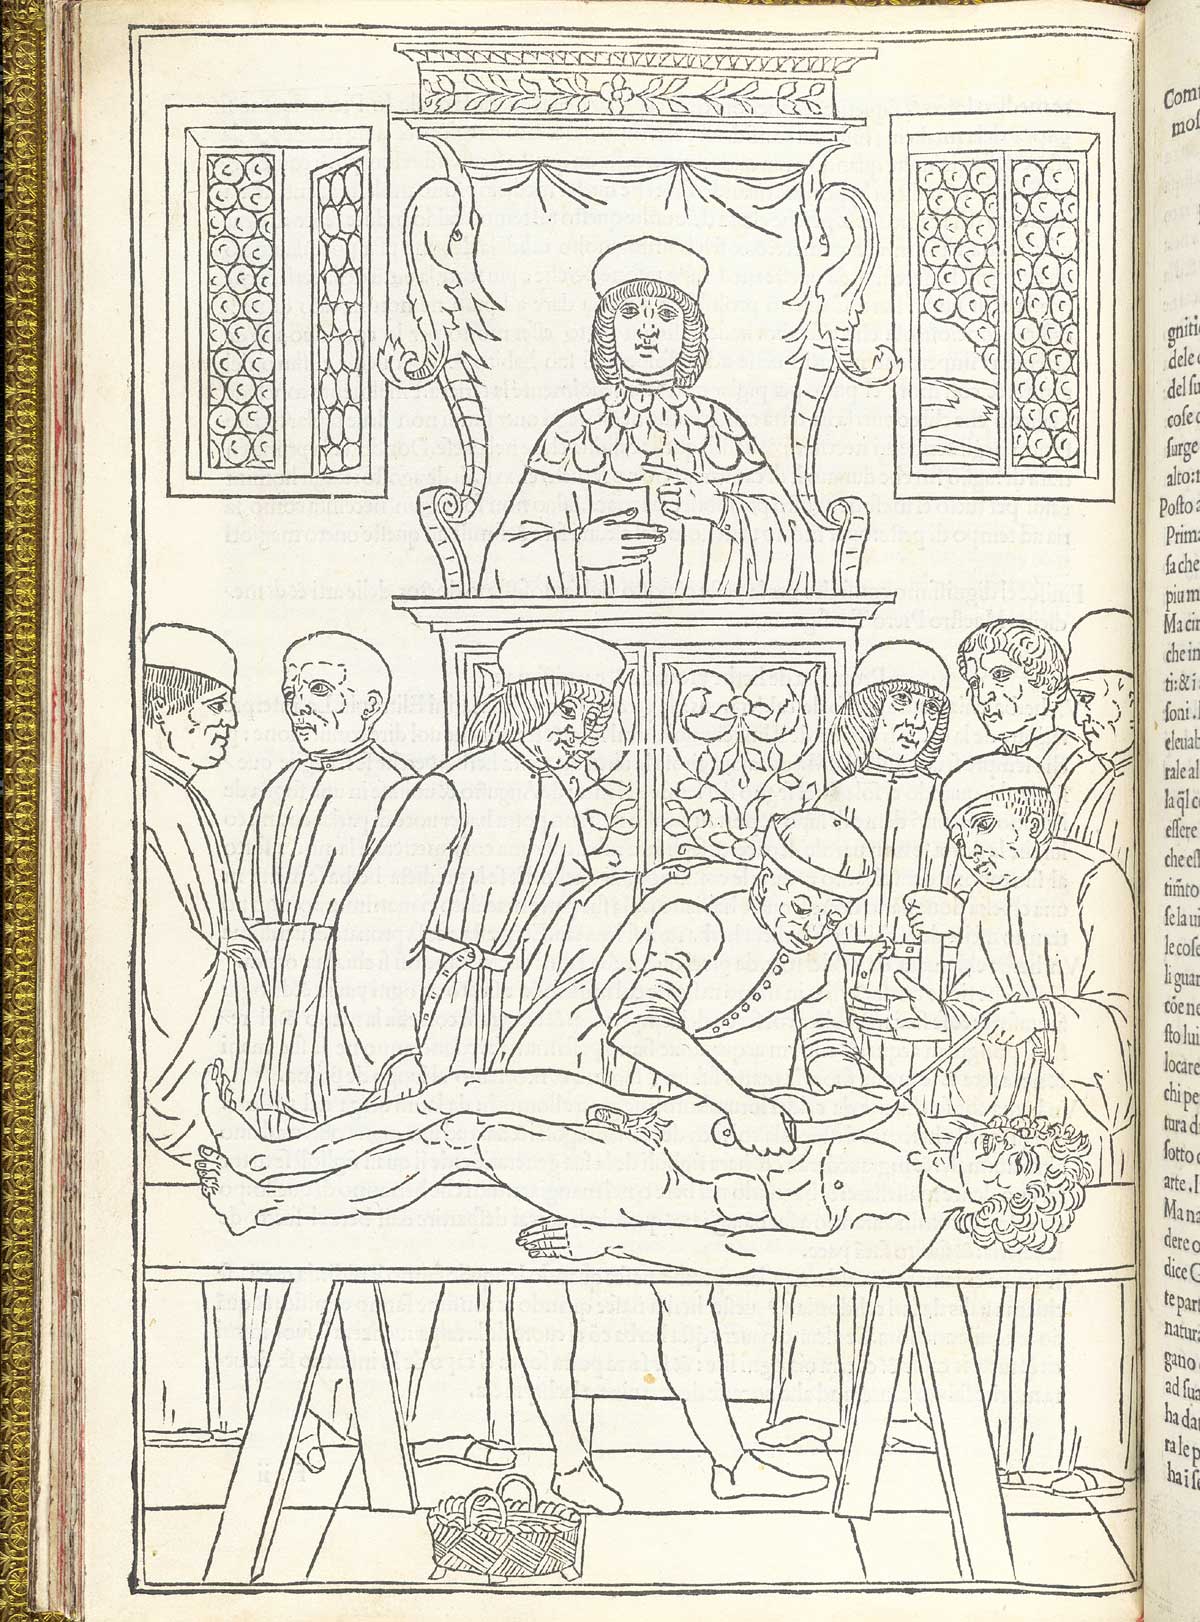 The dissection of a cadaver. This is the first realistic depiction of an anatomy lecture held at a university, namely in an academic hall at the University of Padua. In the chair, a relatively junior doctor, the lector, is set to recite from Mondino’s Anathomia. Behind the table, to the right, a senior doctor begins to point, in his role of demonstrator or ostensor. The basket in front will collect all the parts, to be carefully reunited with the corpse for burial.